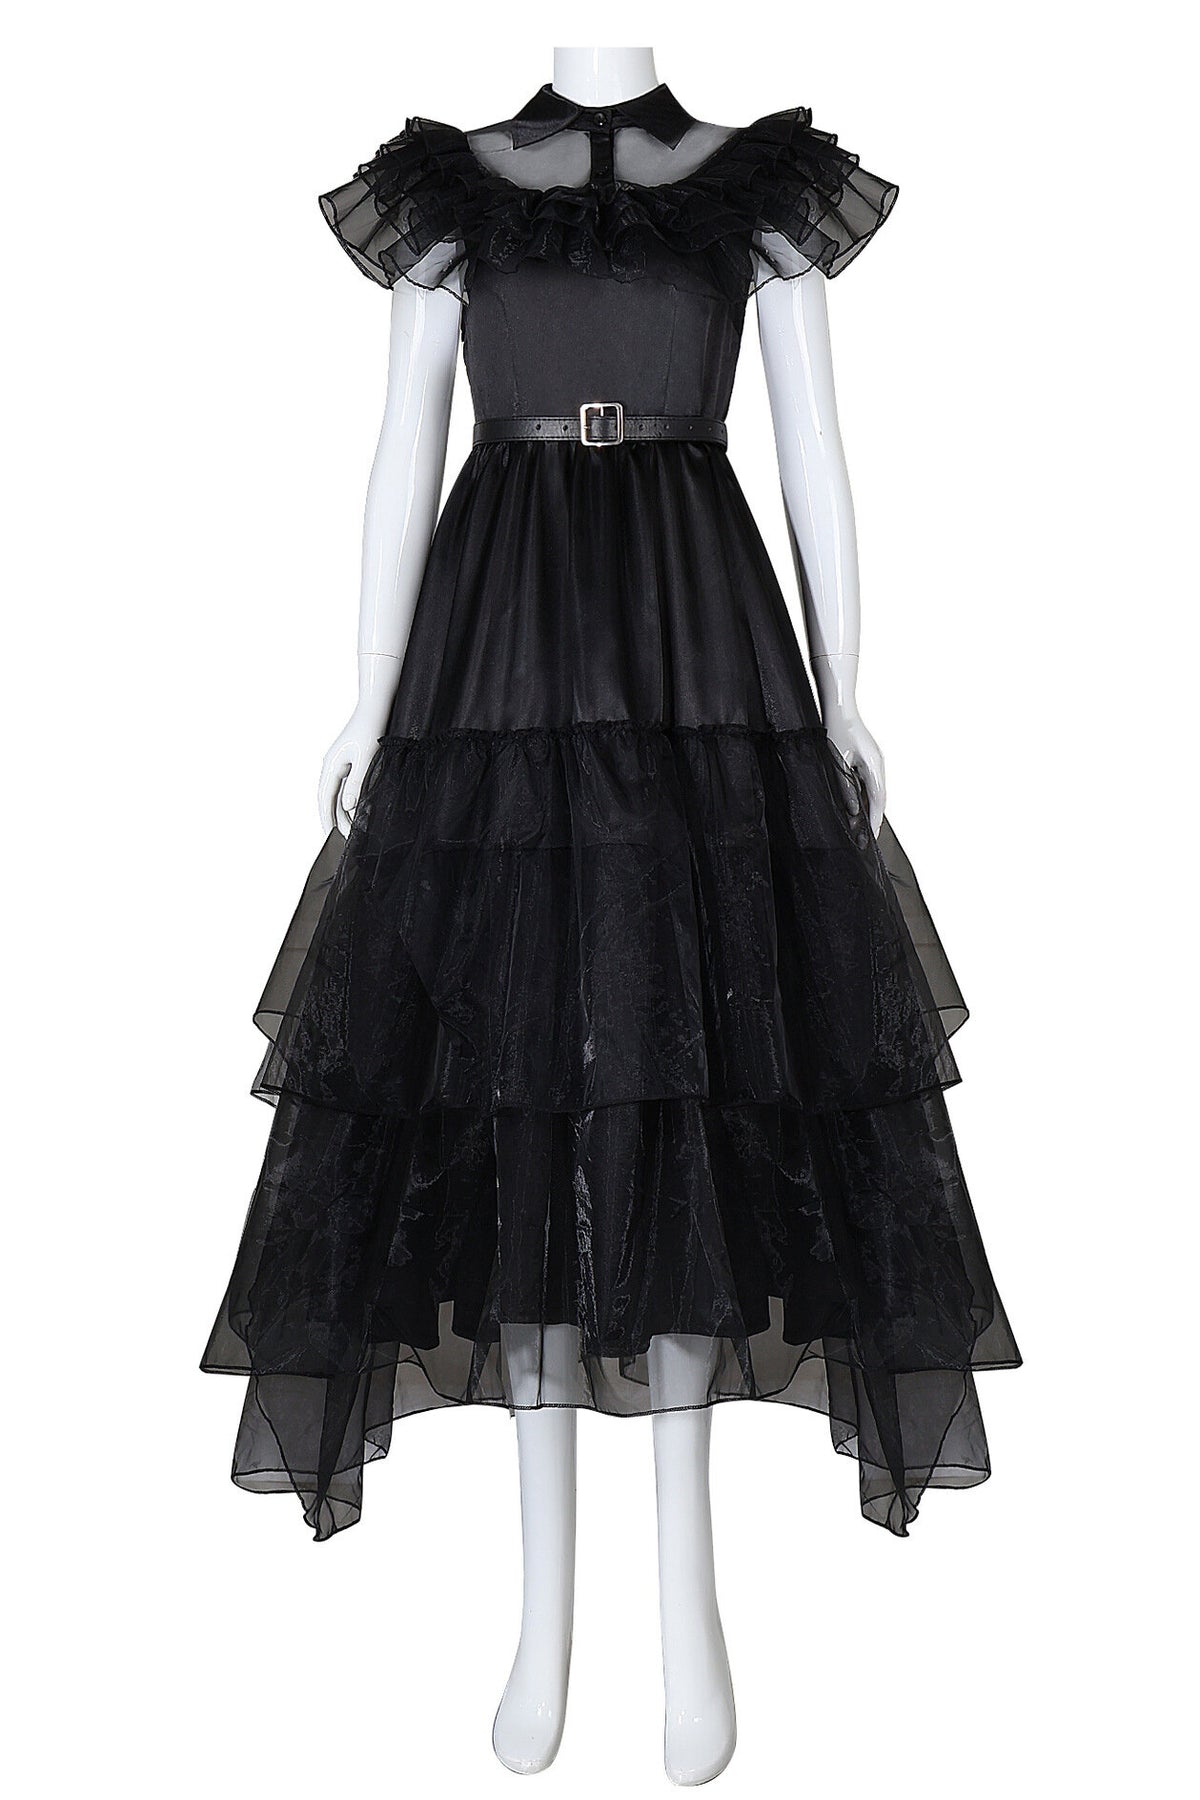 Wednesday Addams Rave'N Dance Dress Costume for Kids and Adults